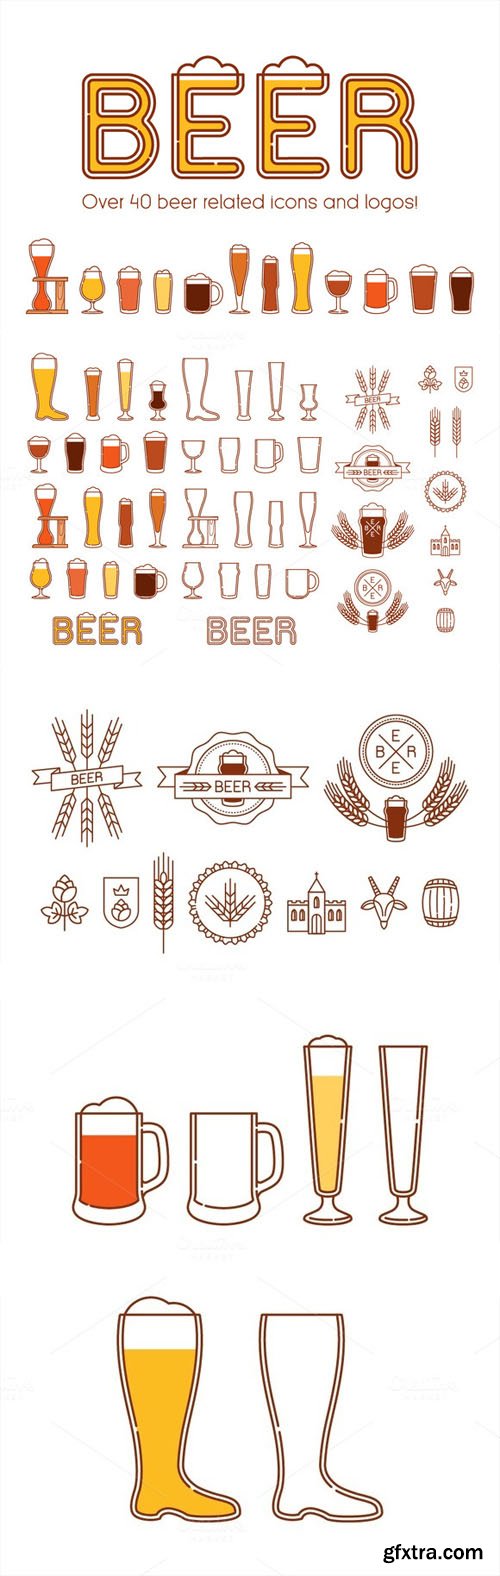 Beers, glasses and logos vol.2 - CM 246728